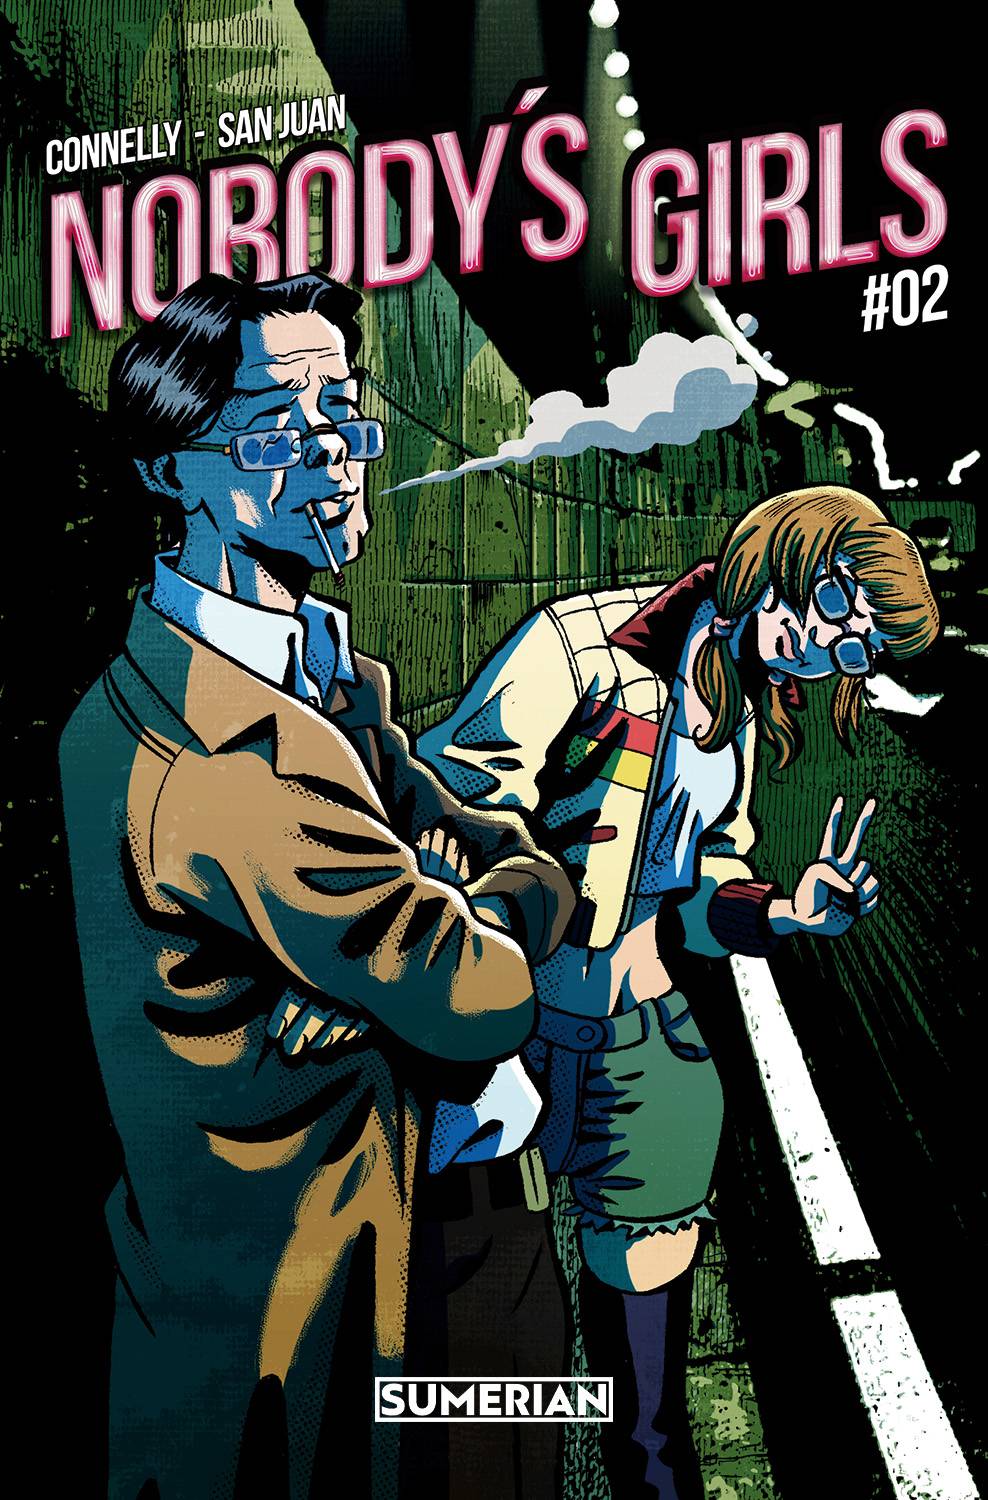 The One Stop Shop Comics & Games Nobodys Girls #2 (Of 3) Cvr A Connelly (Mr) (12/14/2022) SUMERIAN COMICS